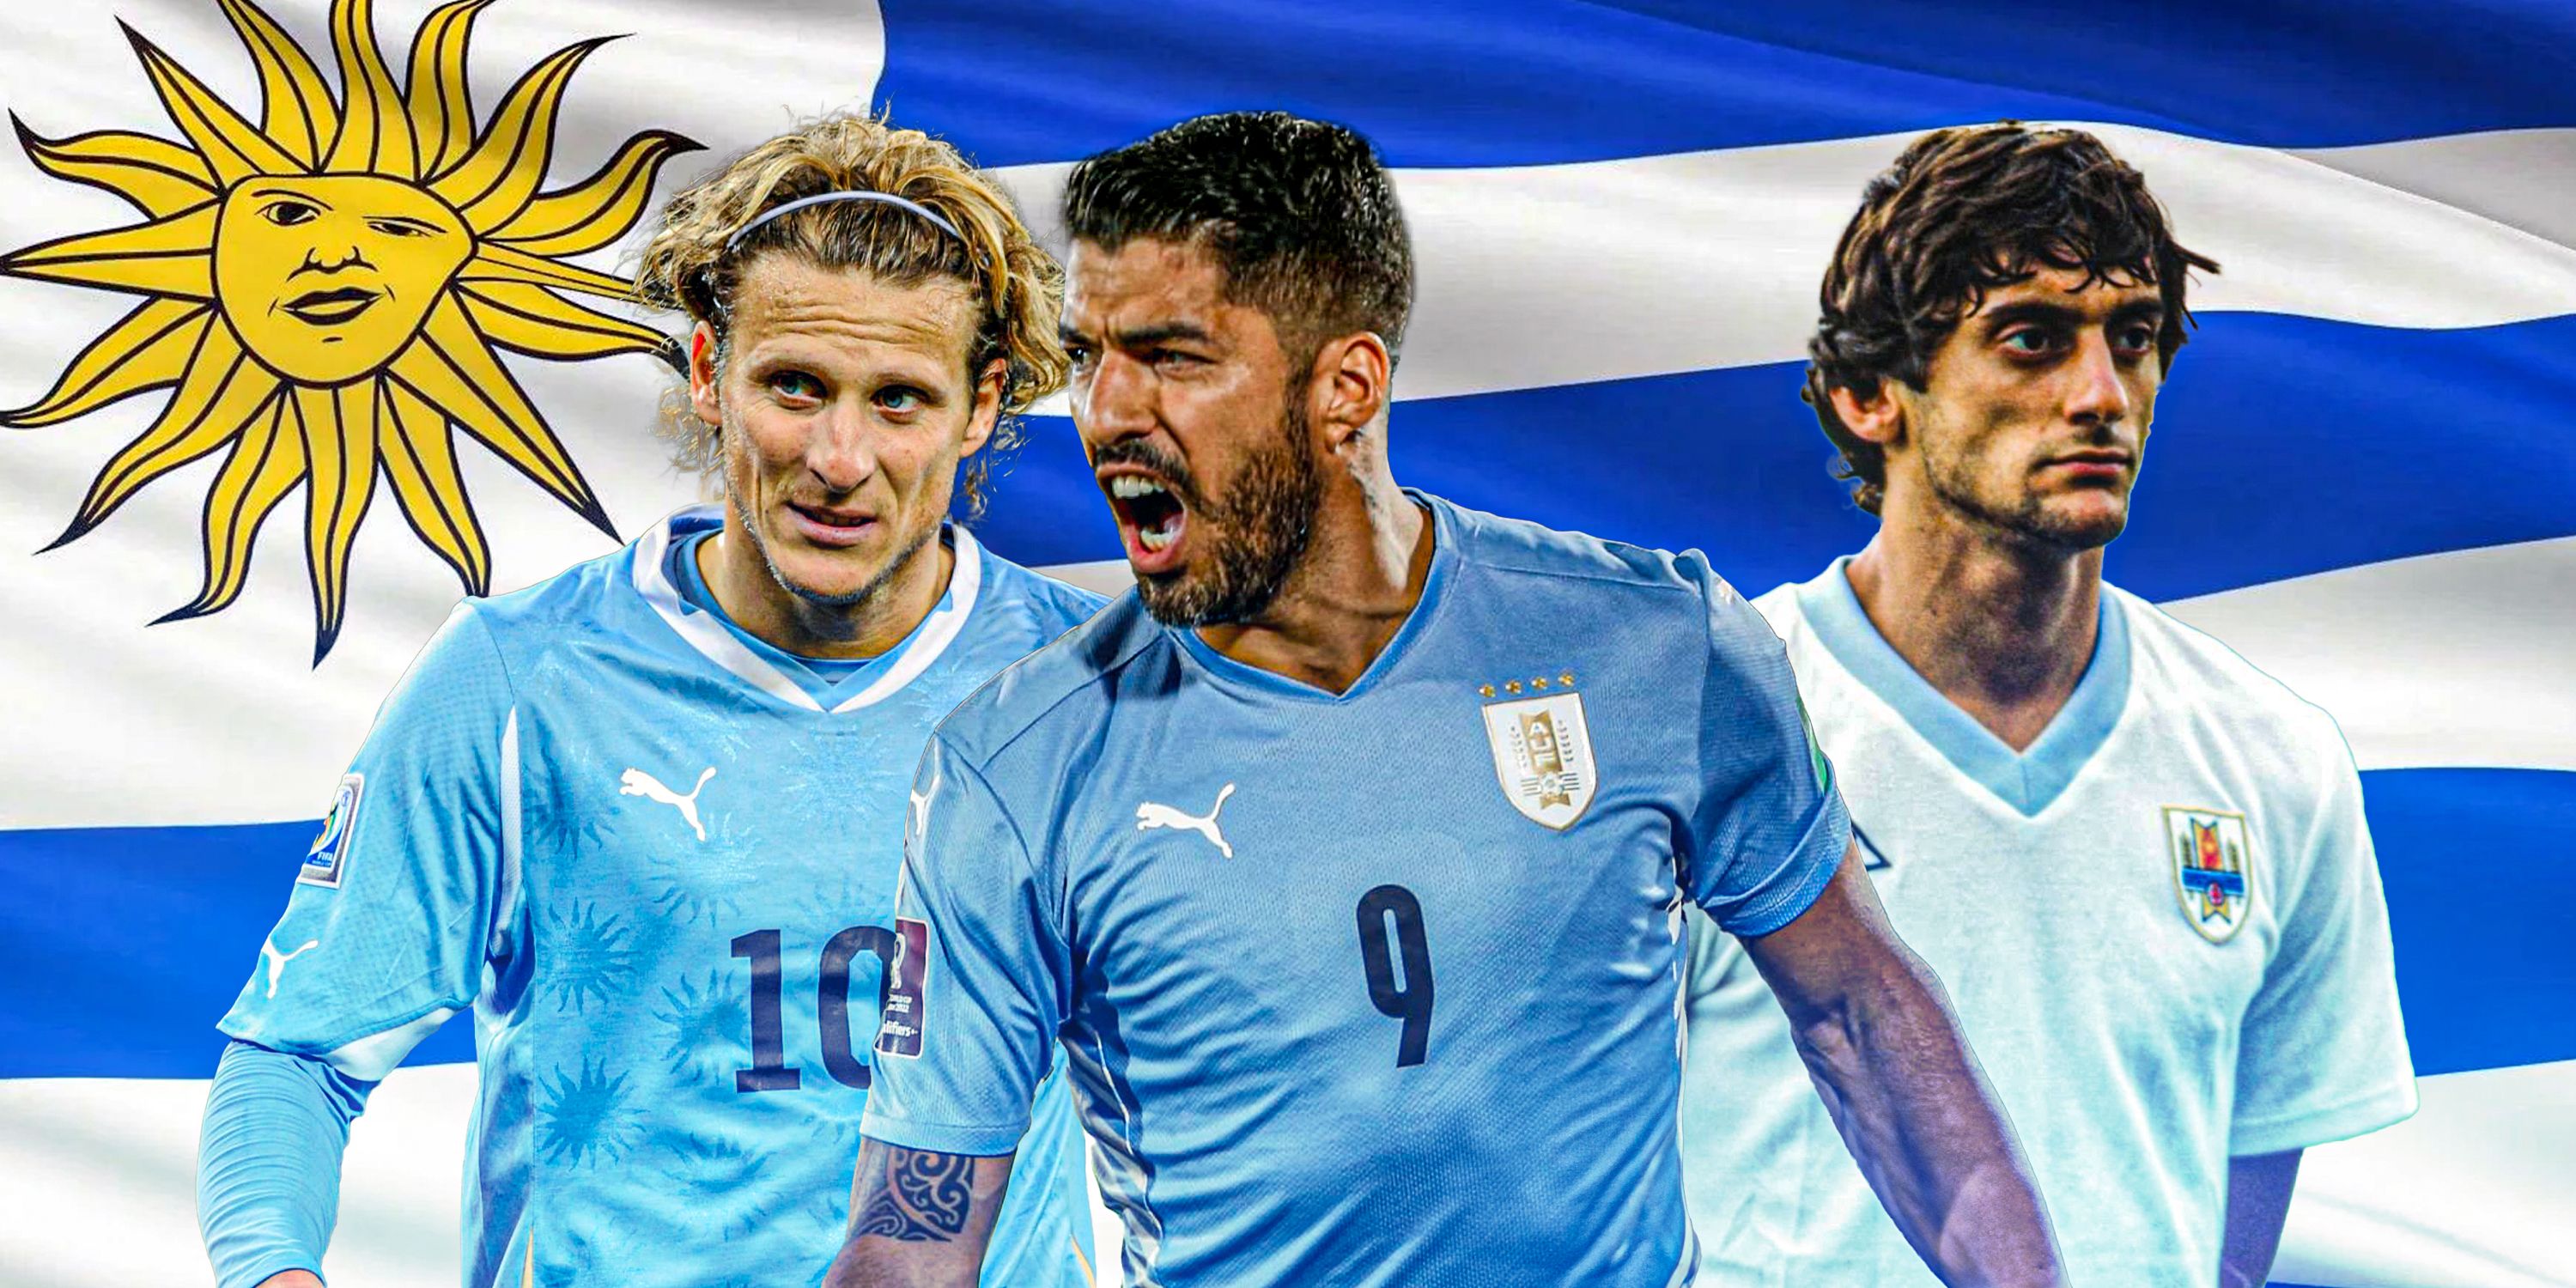 Luis Suarez in the middle with Diego Forlan and Enzo Francescoli all in Uruguay kit with Urguayan theme/badge